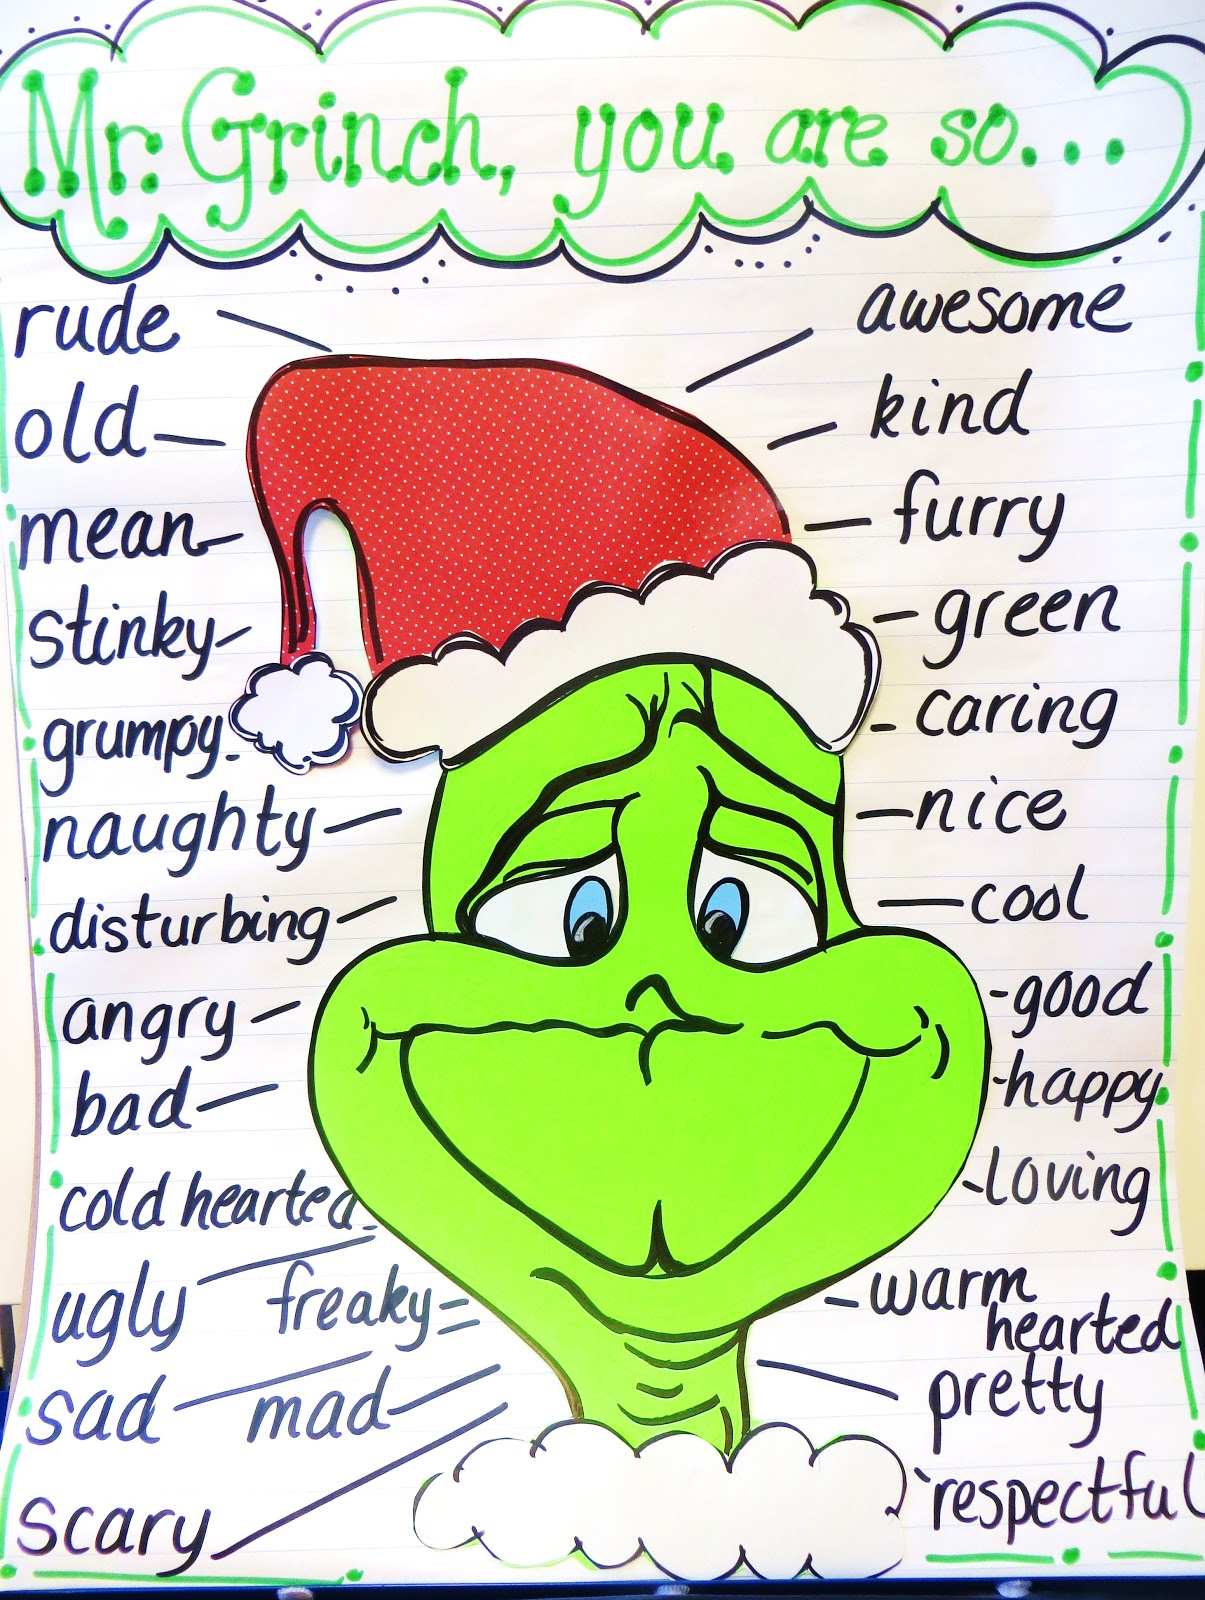 what-are-some-adjectives-for-christmas-wehelpcheapessaydownload-web